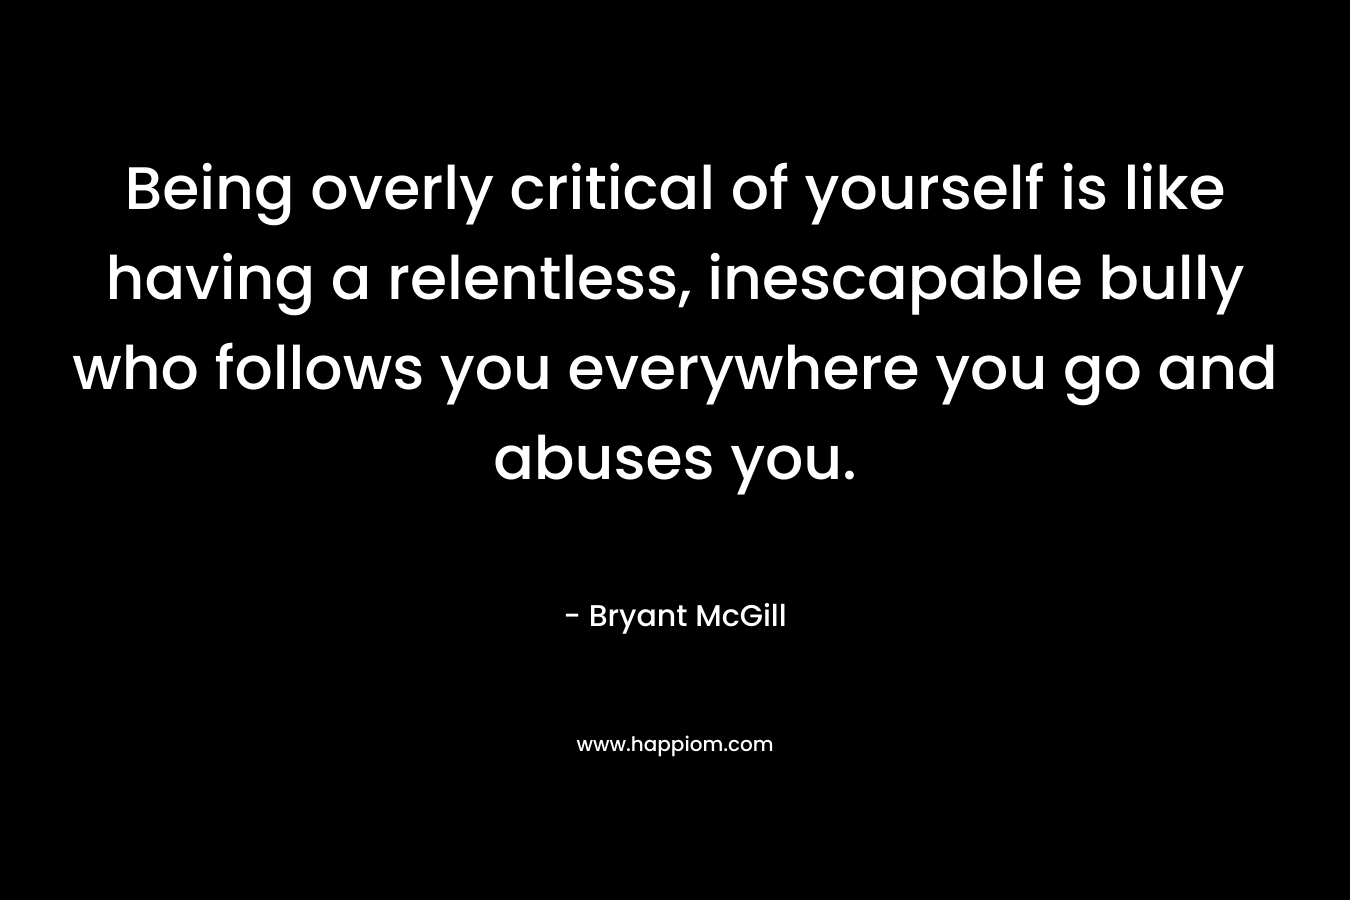 Being overly critical of yourself is like having a relentless, inescapable bully who follows you everywhere you go and abuses you. – Bryant McGill